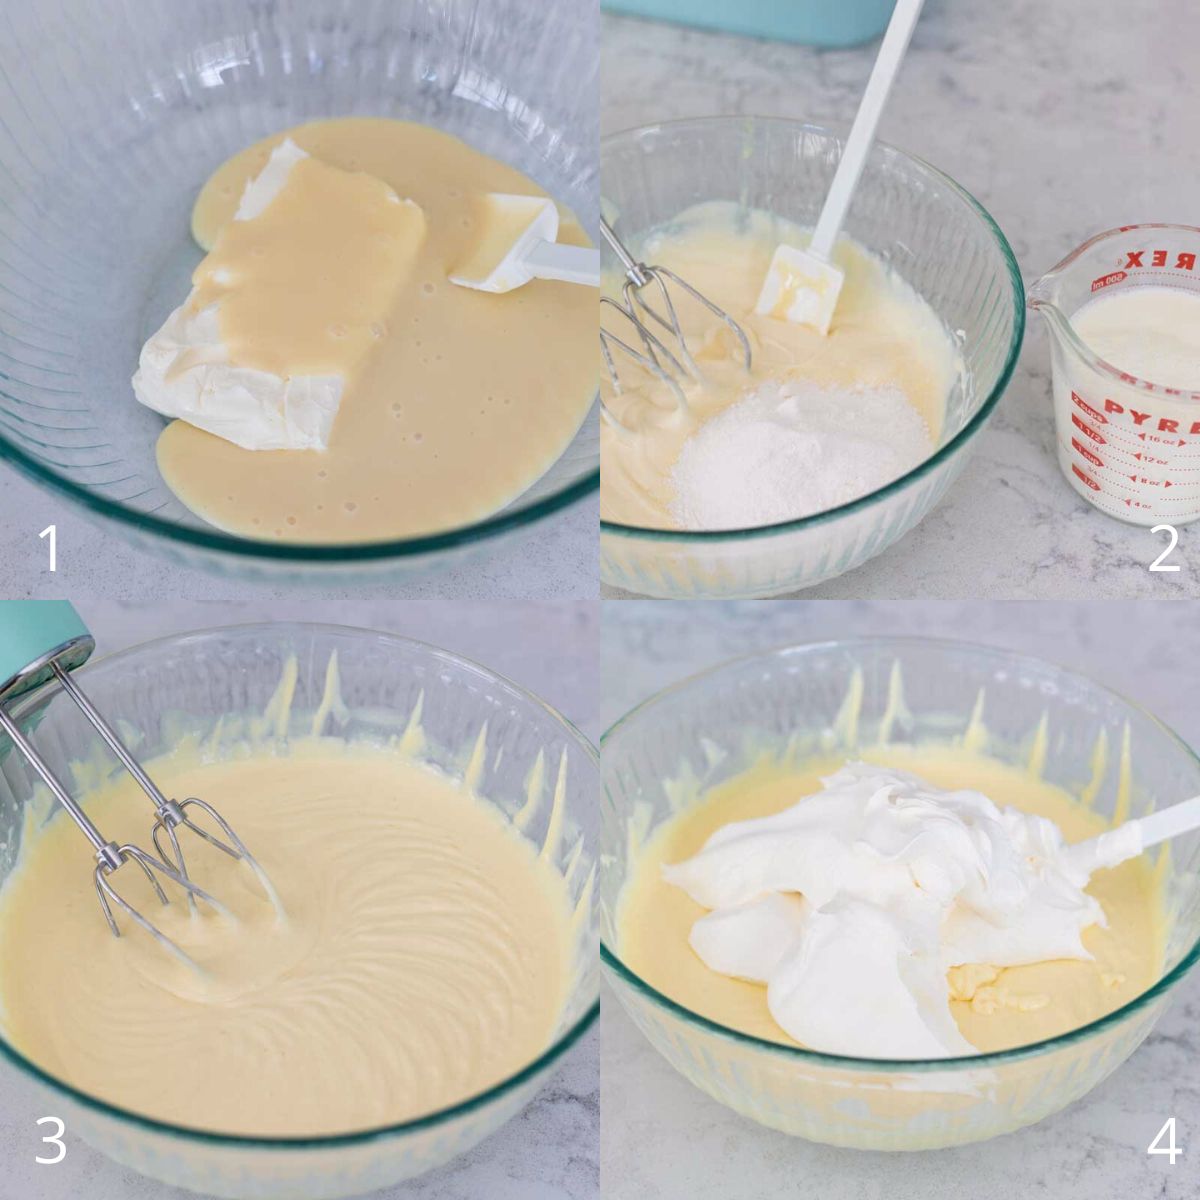 Step by step photos show how to beat the cream cheese with condensed milk and add the pudding and milk.